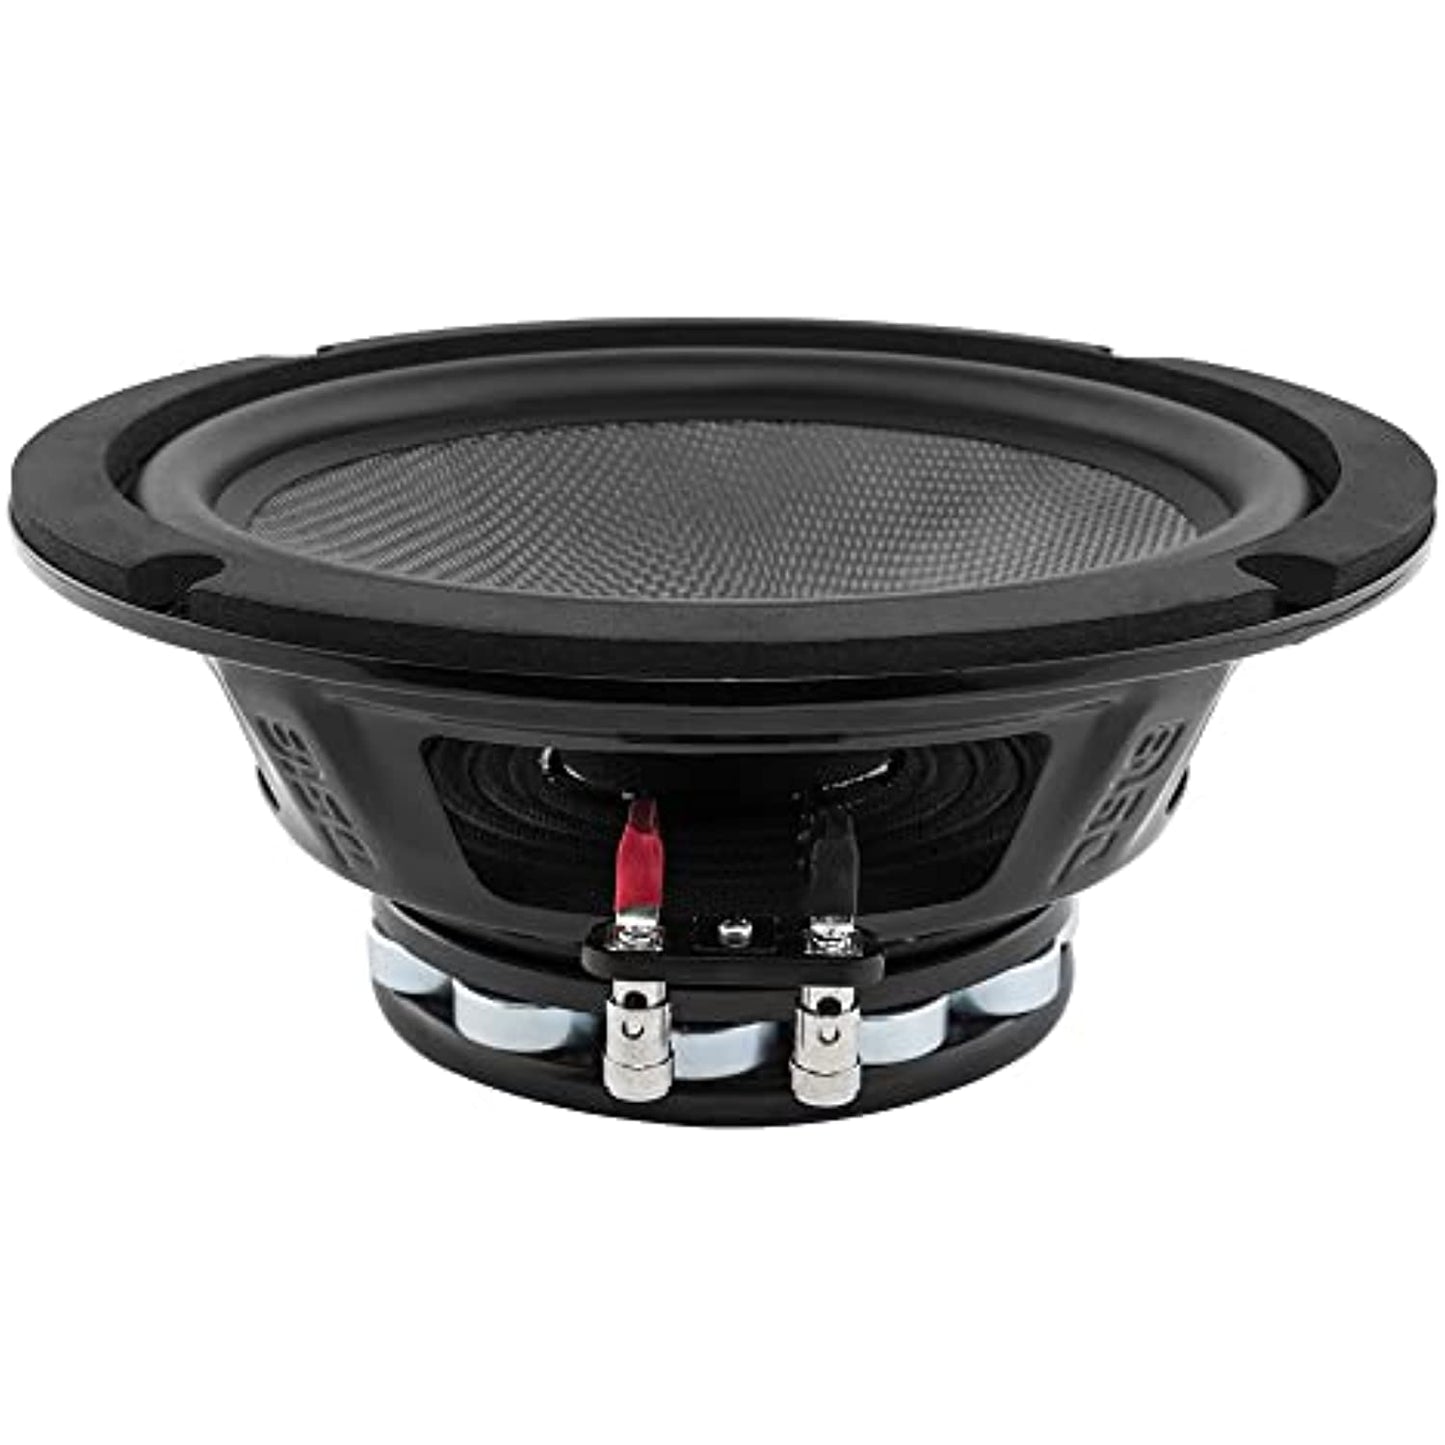 DS18 PRO-CF8.2NR 8" Water Resistant Loudspeaker - Mid-Bass Carbon Fiber Cone and Neodymium Rings Magnet 600 Watts 2-Ohms - Ideal for Motorcycle & Motorsports